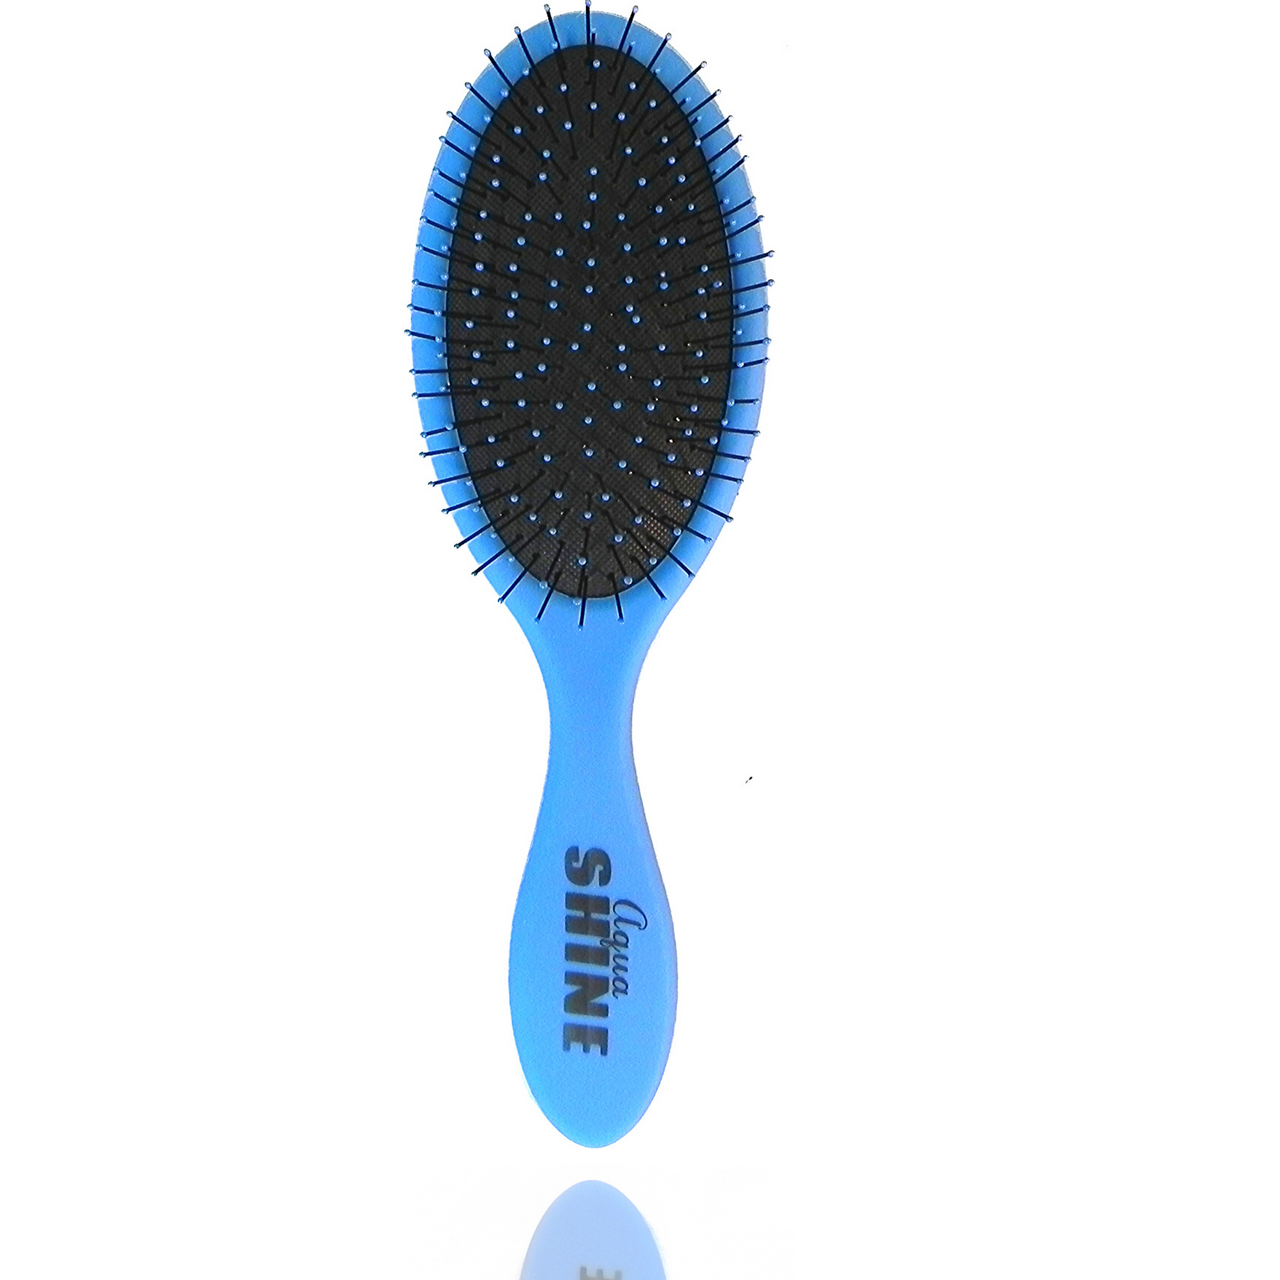 Wet Dry Brush Soft Flexible Bristles Detangles and Smooths with Ease - Blue